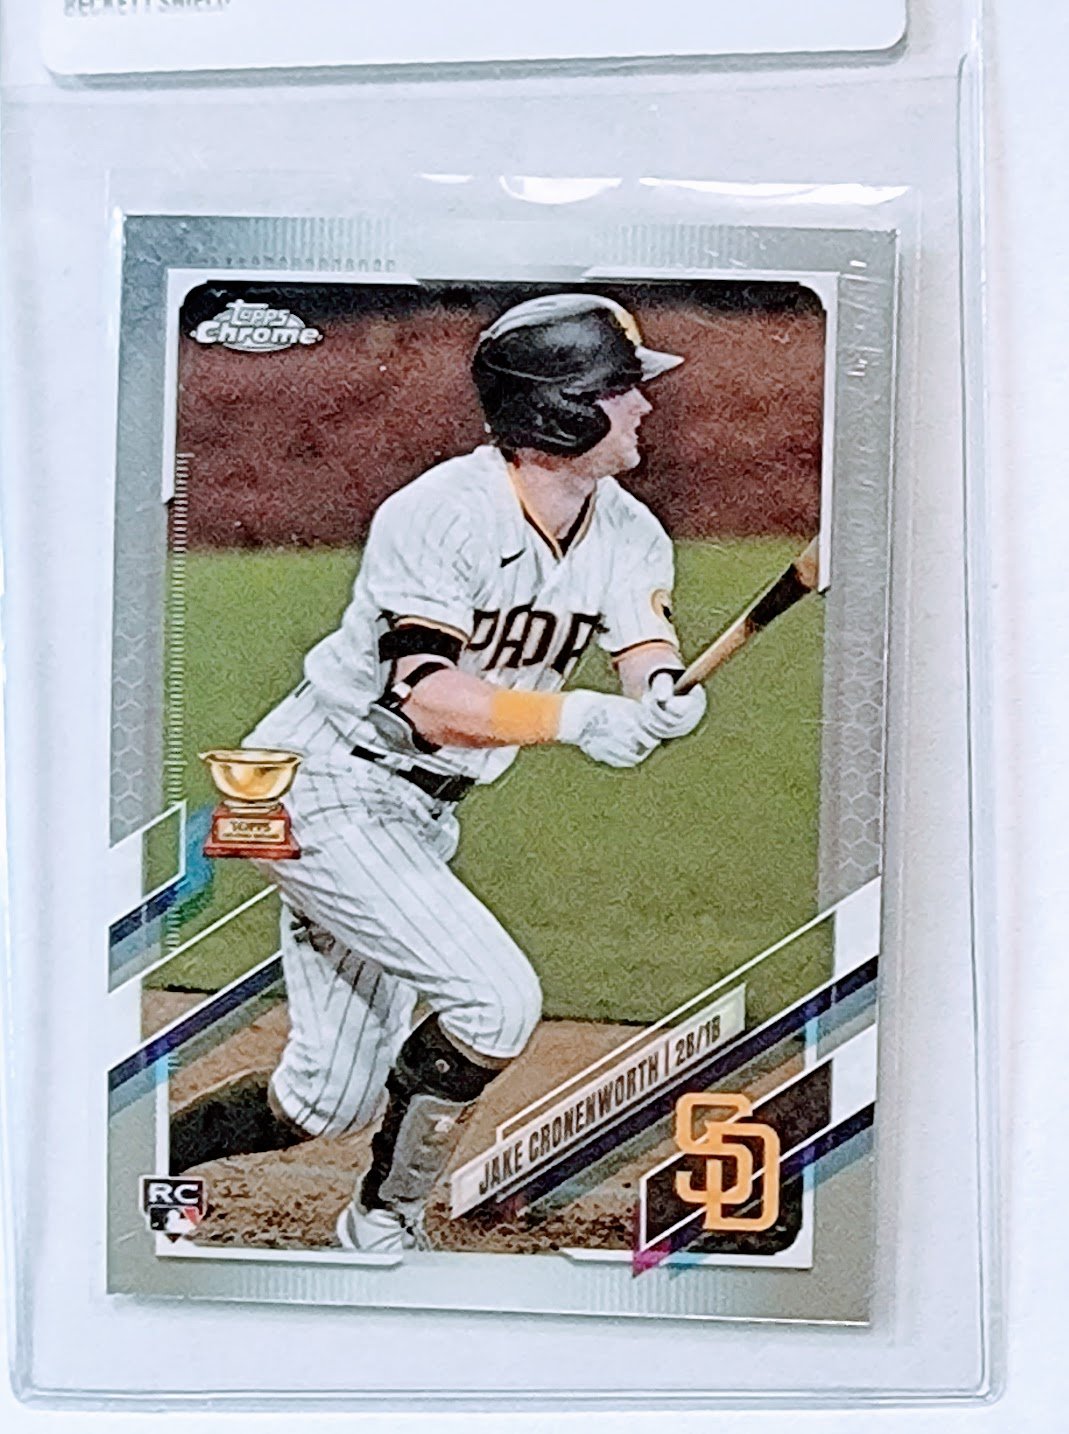 2021 Topps Chrome Jake Cronenworth All Star Rookie Baseball Trading Card TPTV simple Xclusive Collectibles   